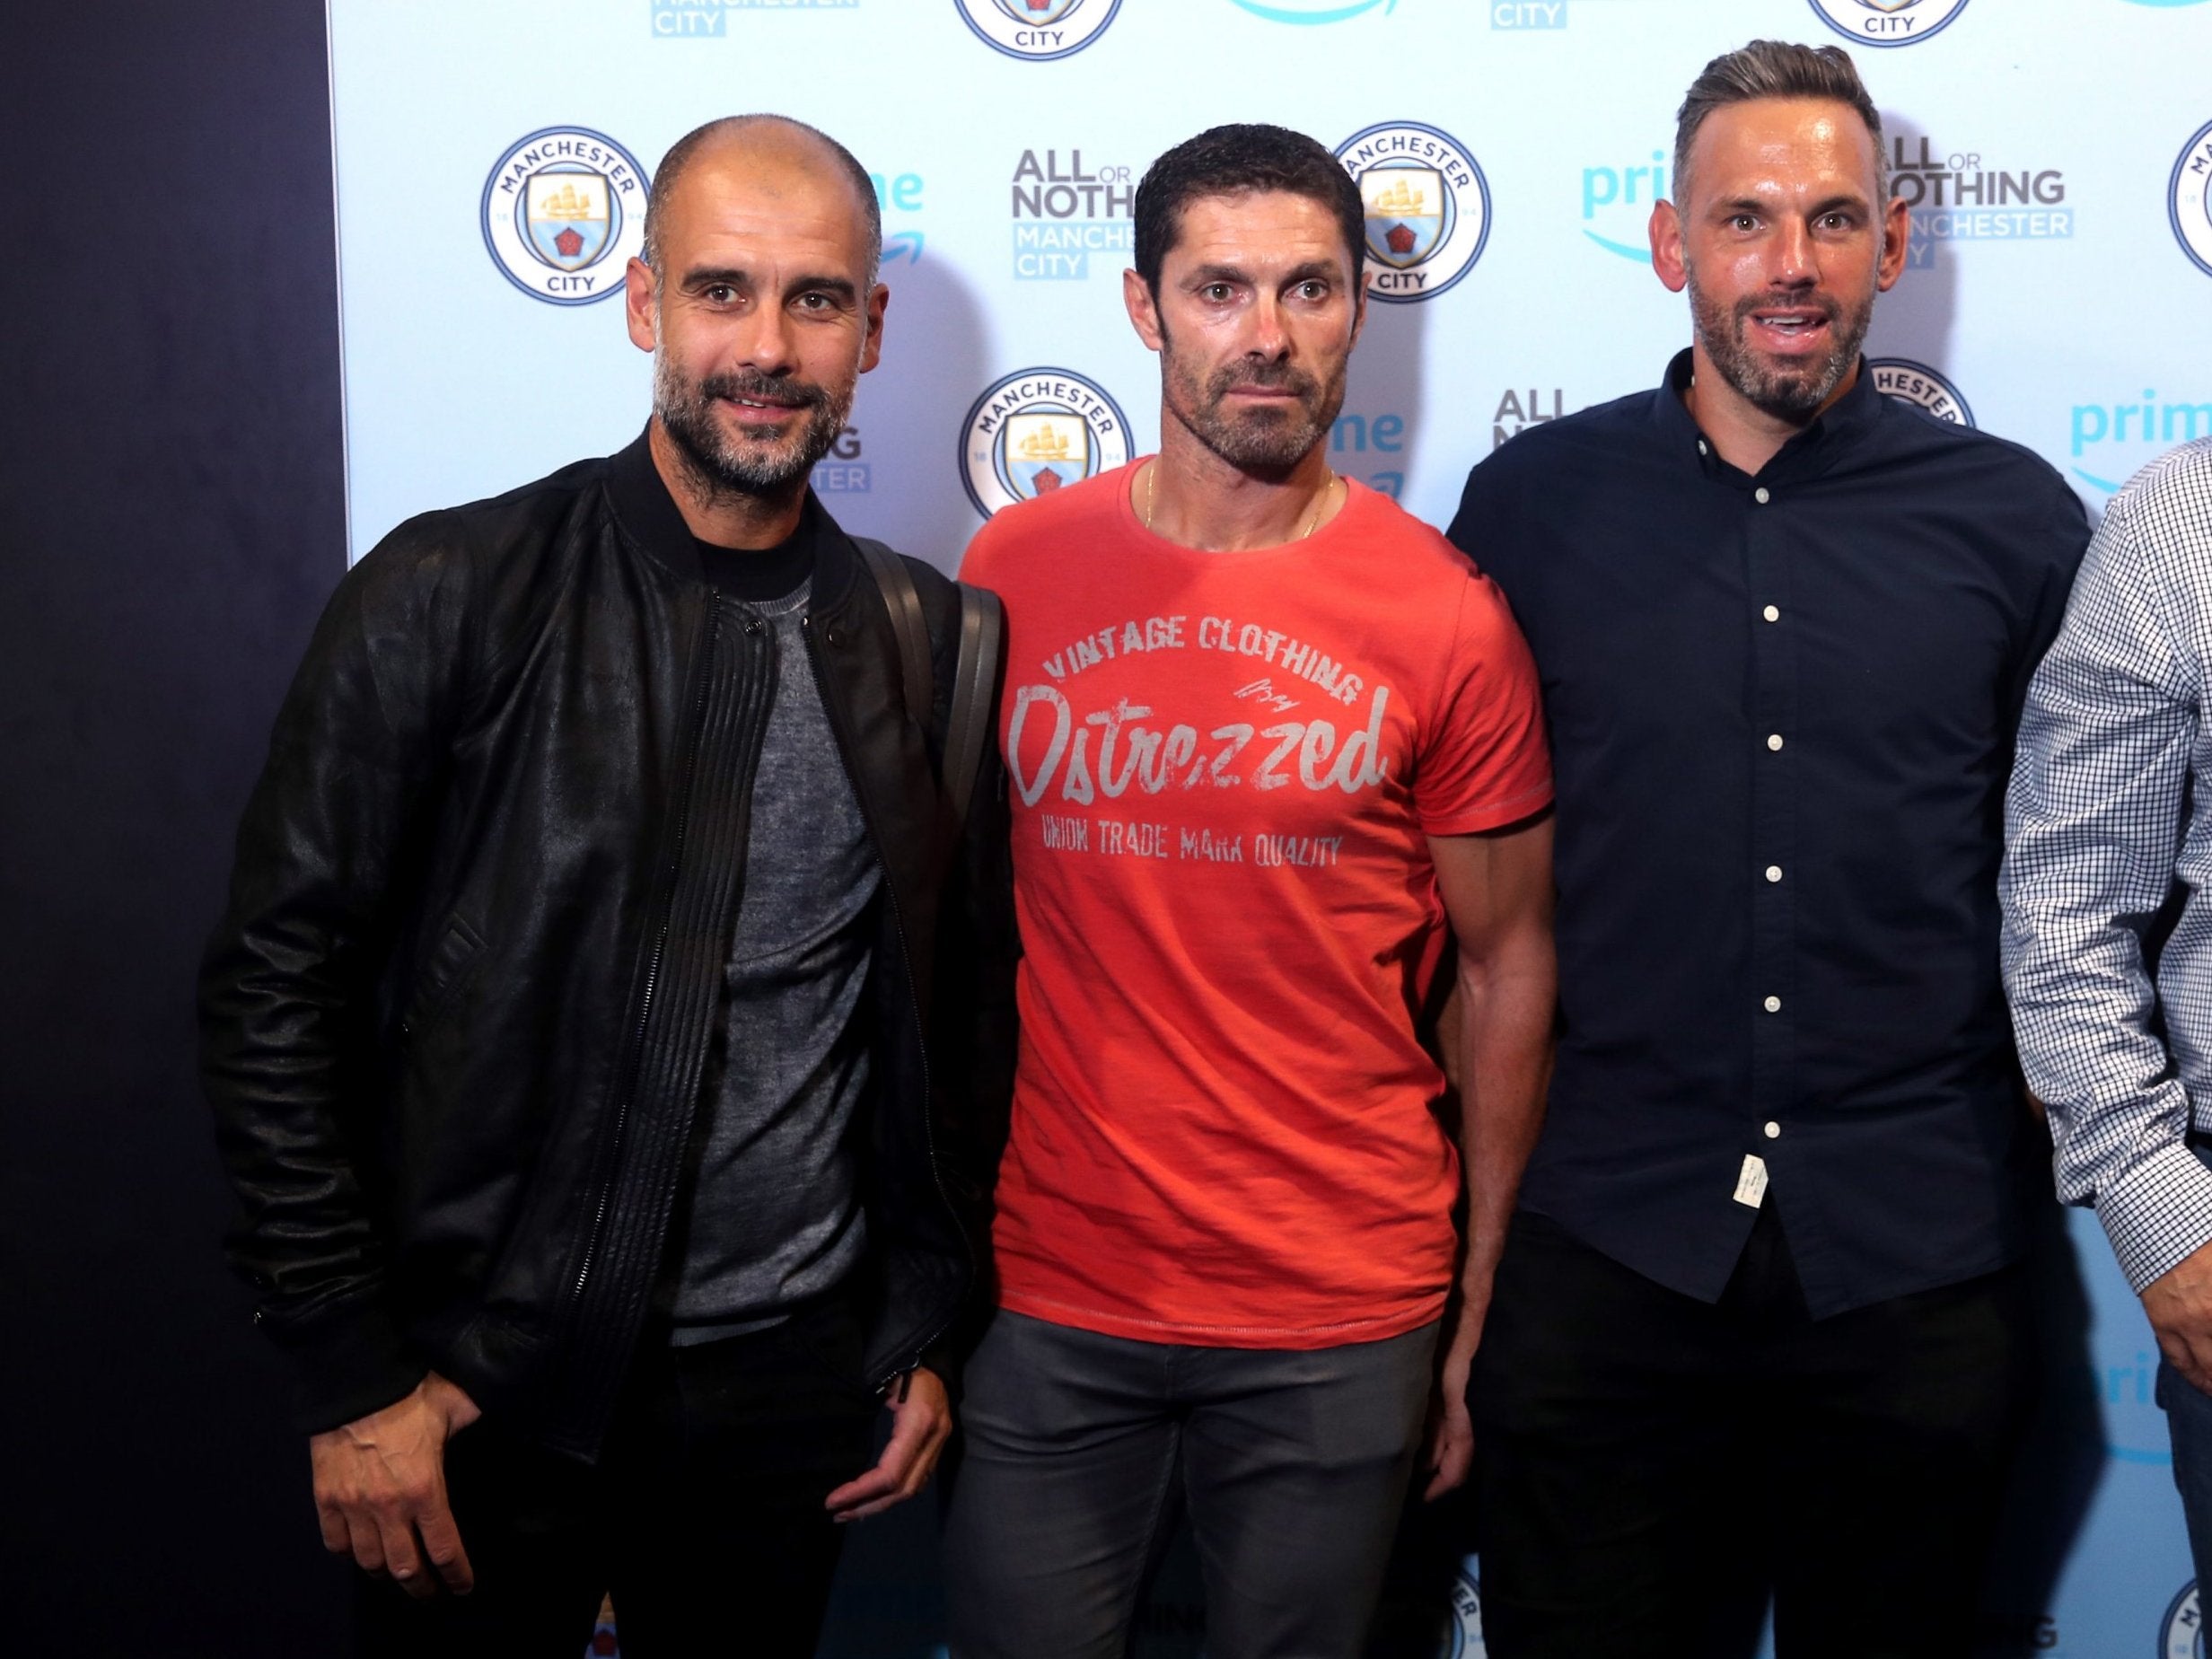 Manchester City manager Pep Guardiola was in attendance for the documentary premier